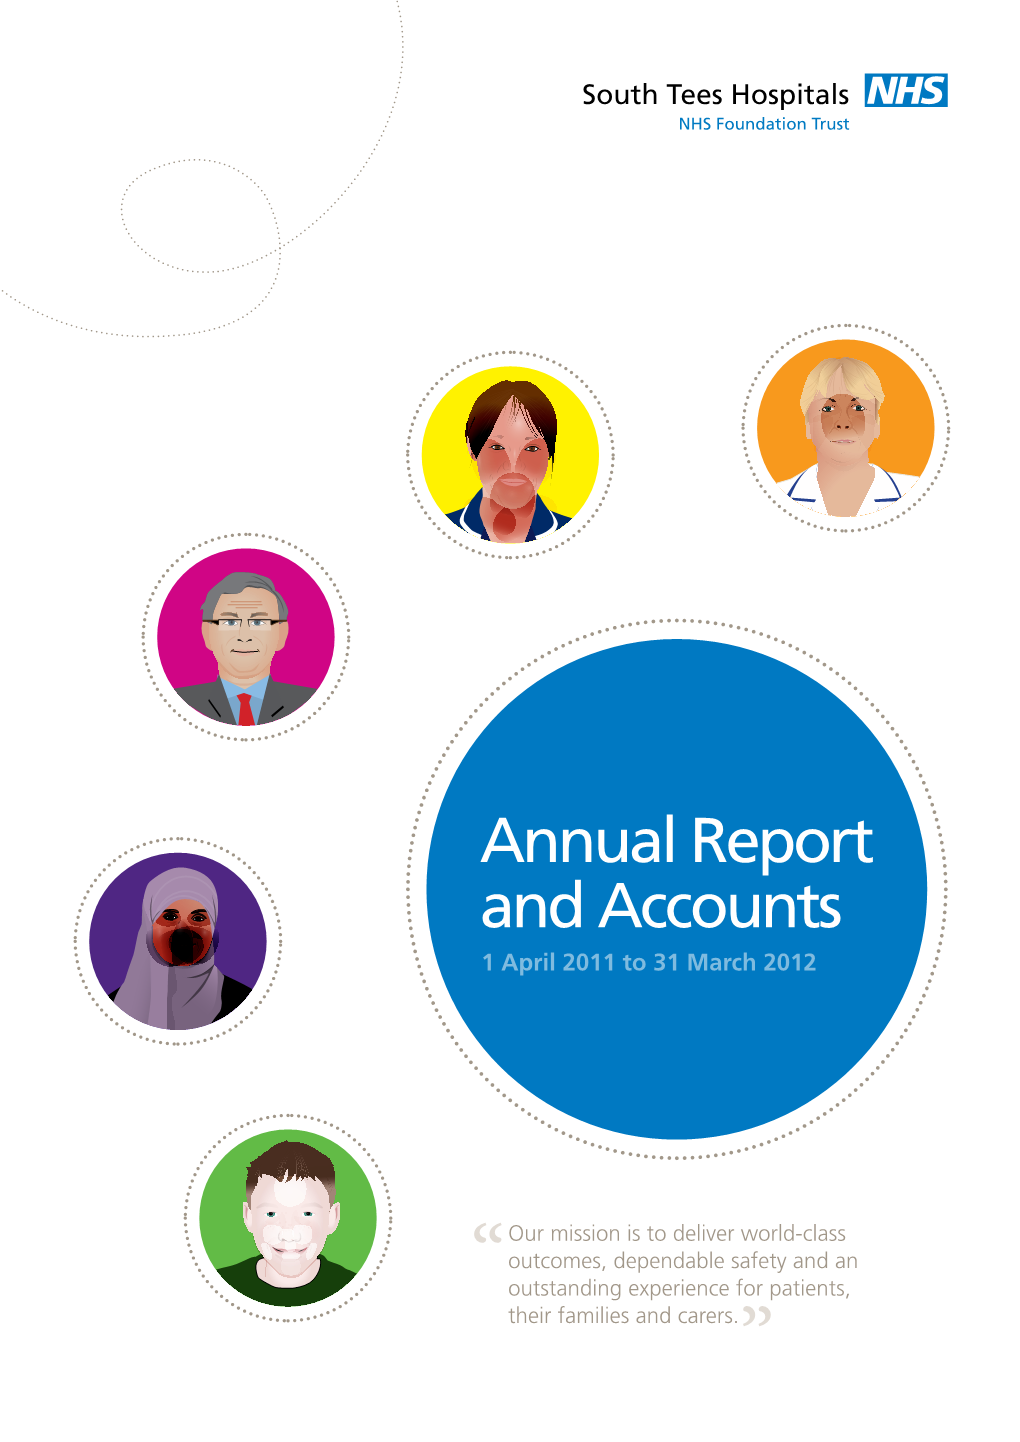 Annual Report and Accounts 1 April 2011 to 31 March 2012